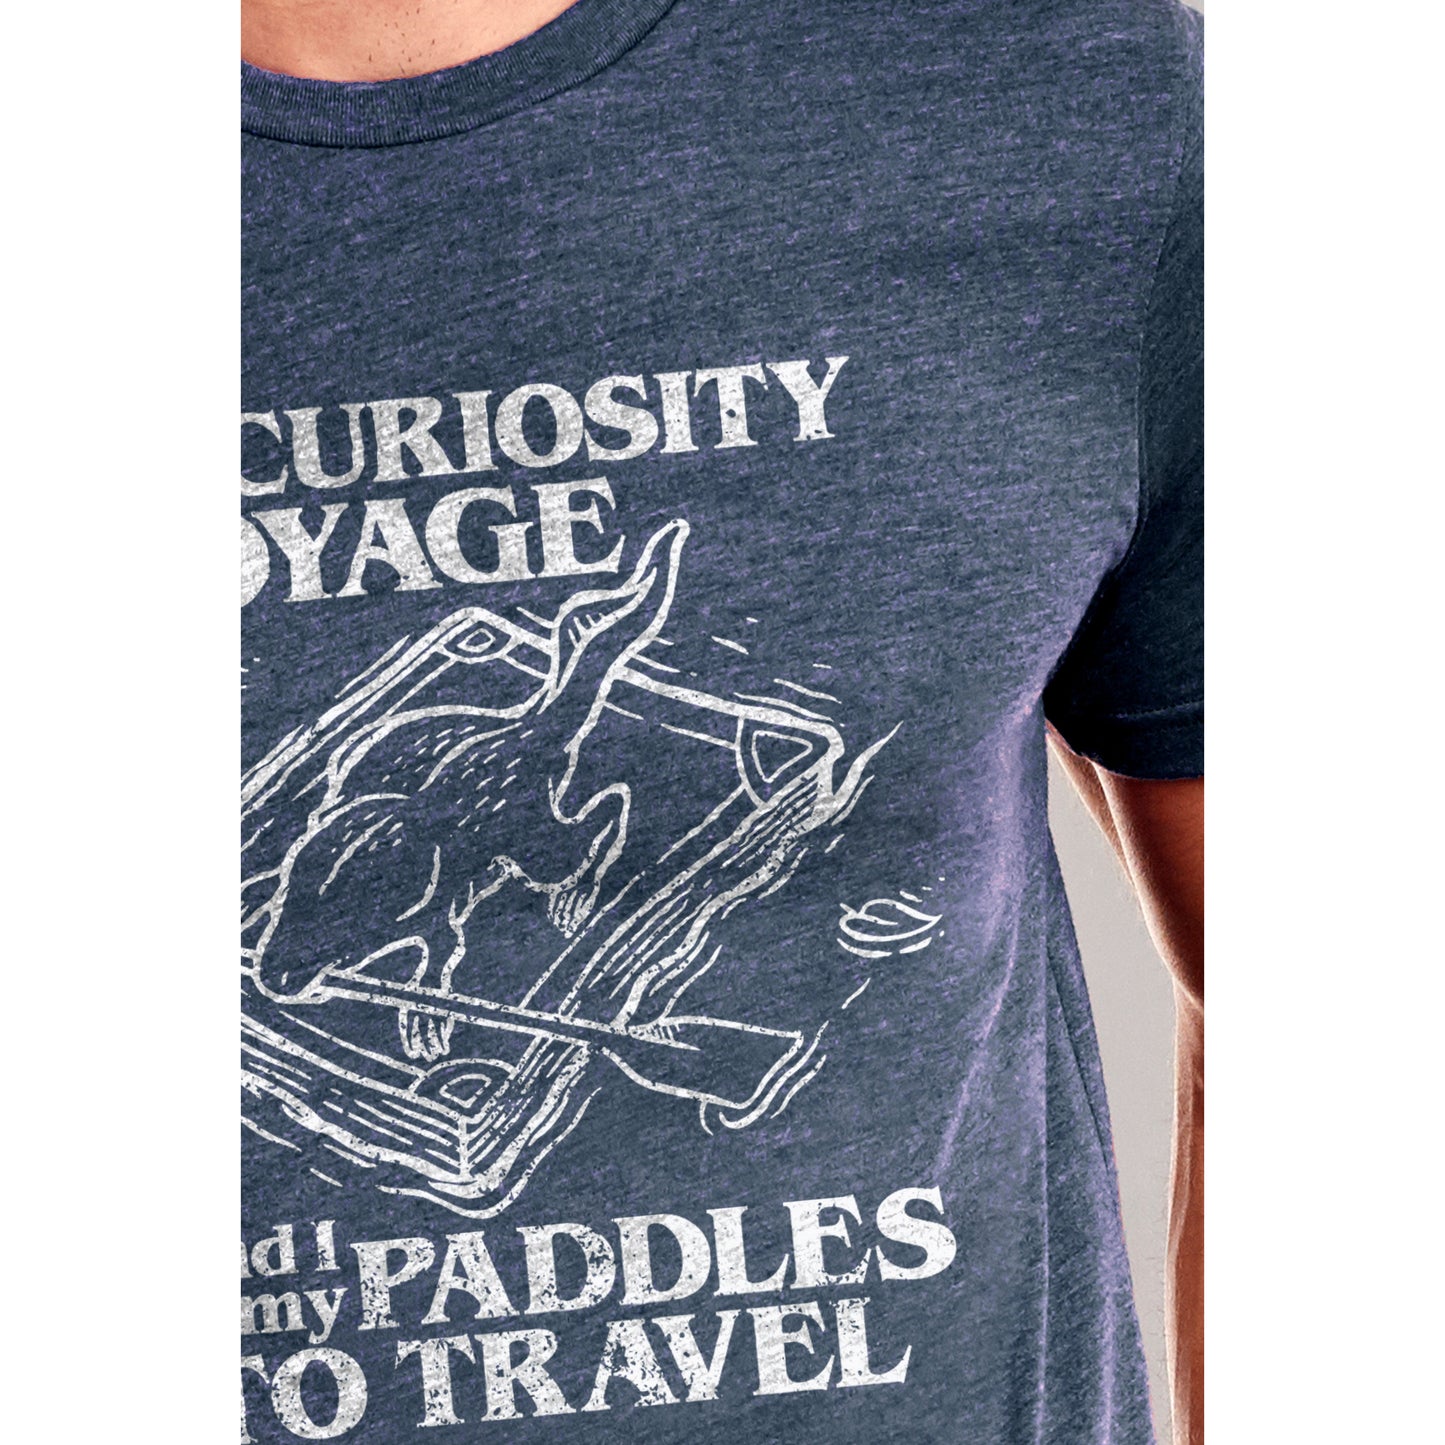 I Am On A Curiosity Voyage And I Need My Paddles To Travel Printed Graphic Men's Crew T-Shirt Vintage White Closeup Image